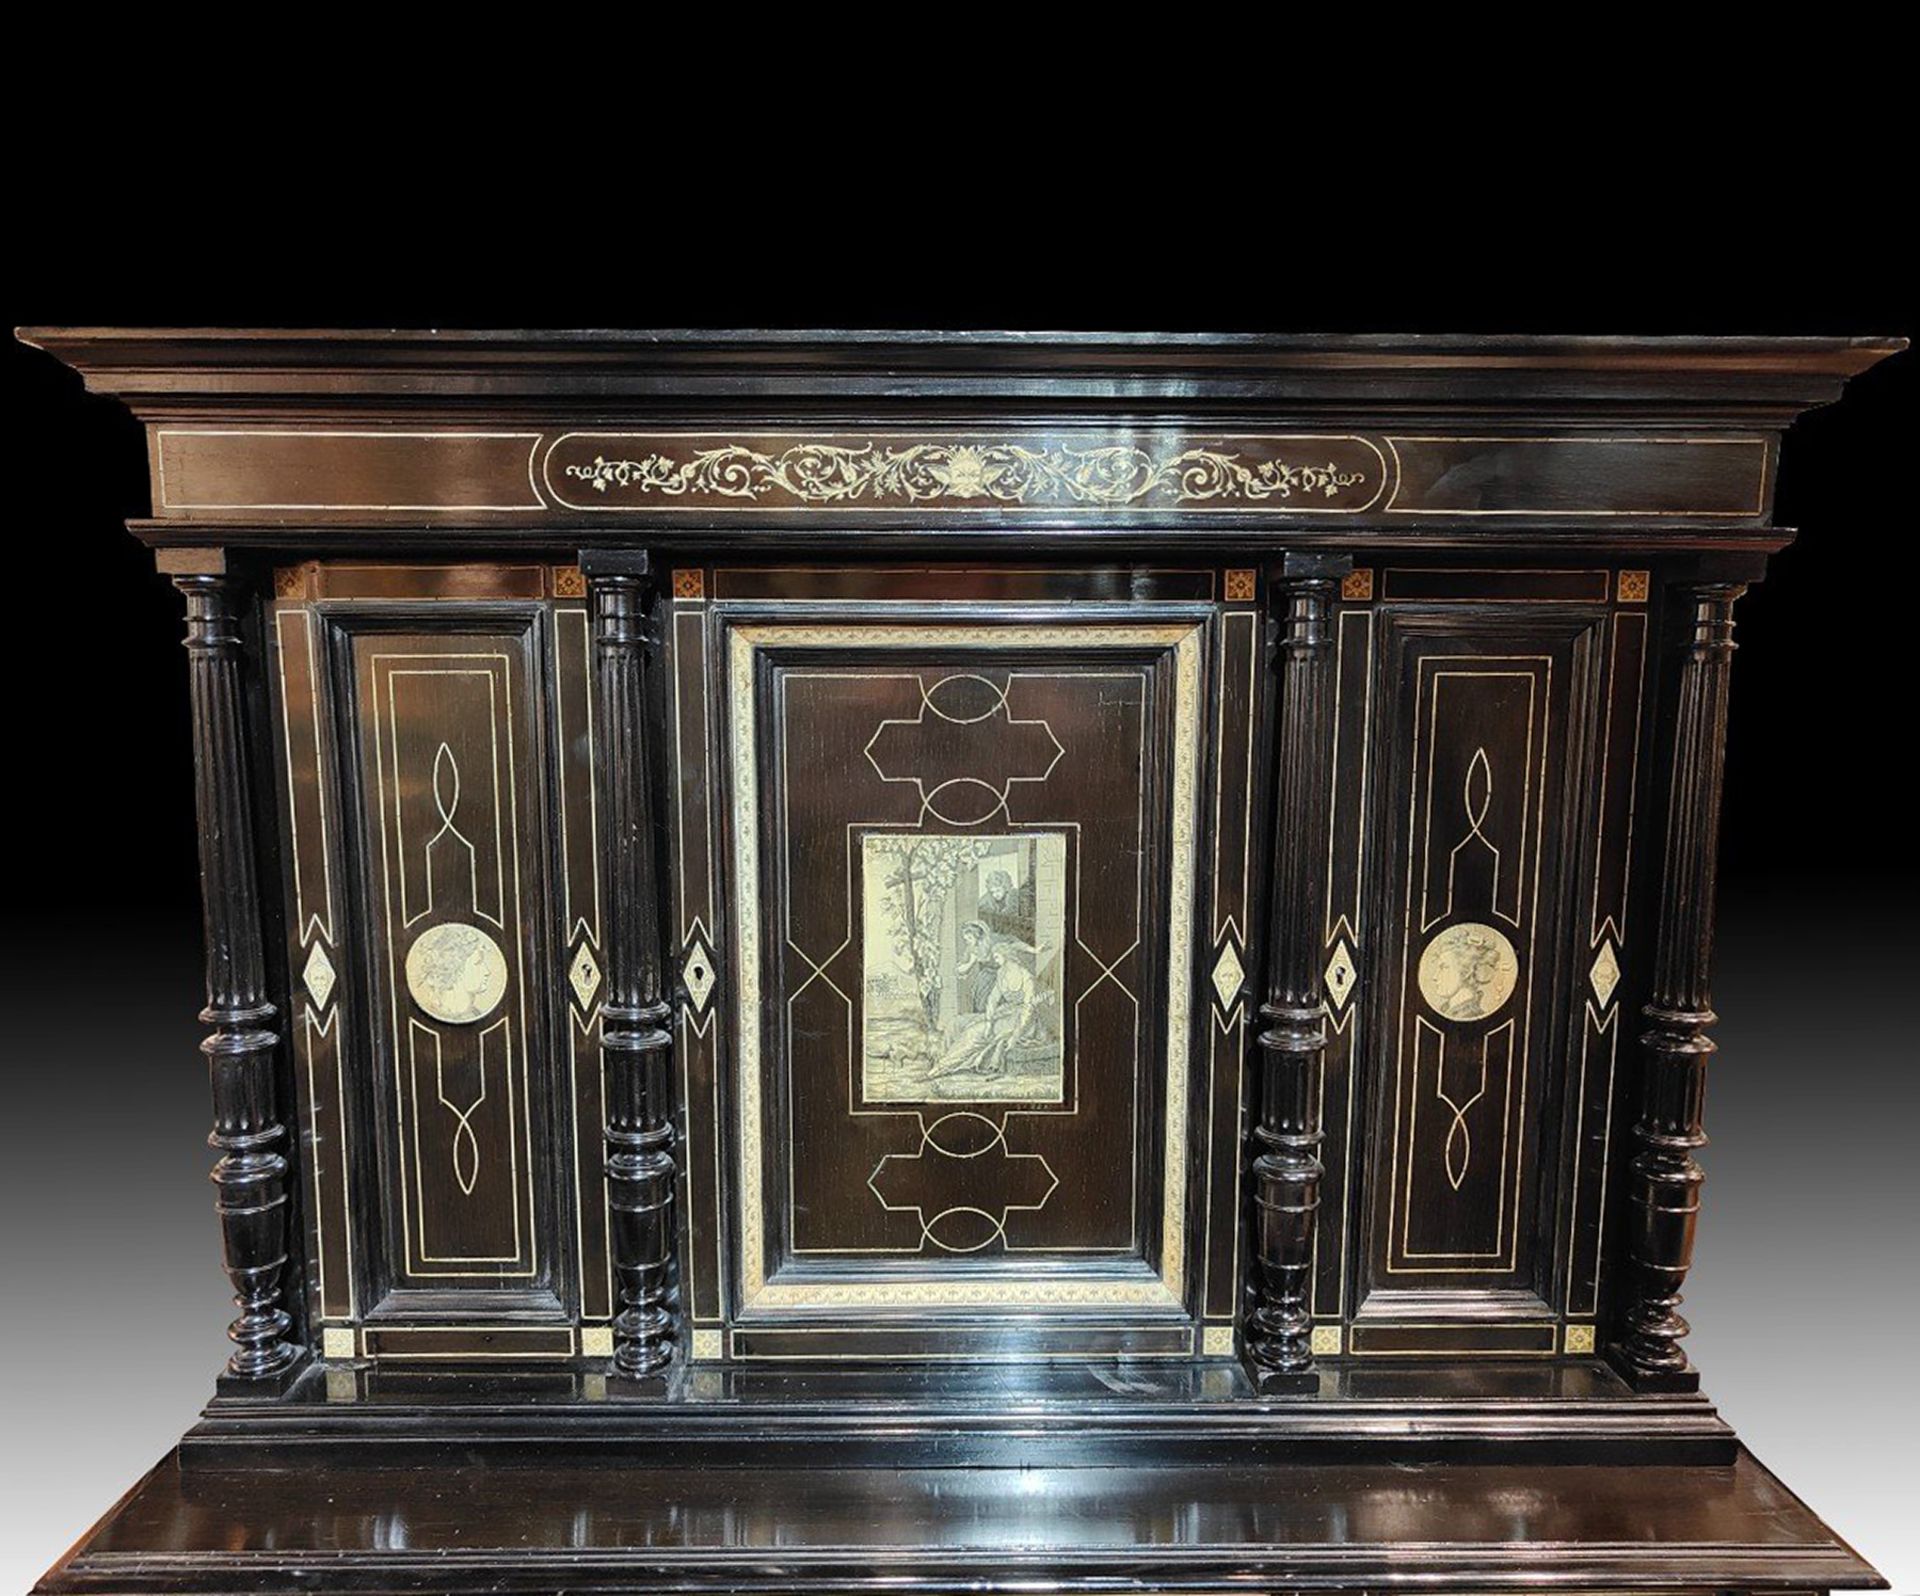 Important 19th century Florentine cabinet with bone marquetry, work from Northern Italy, Milan or Fl - Image 4 of 10